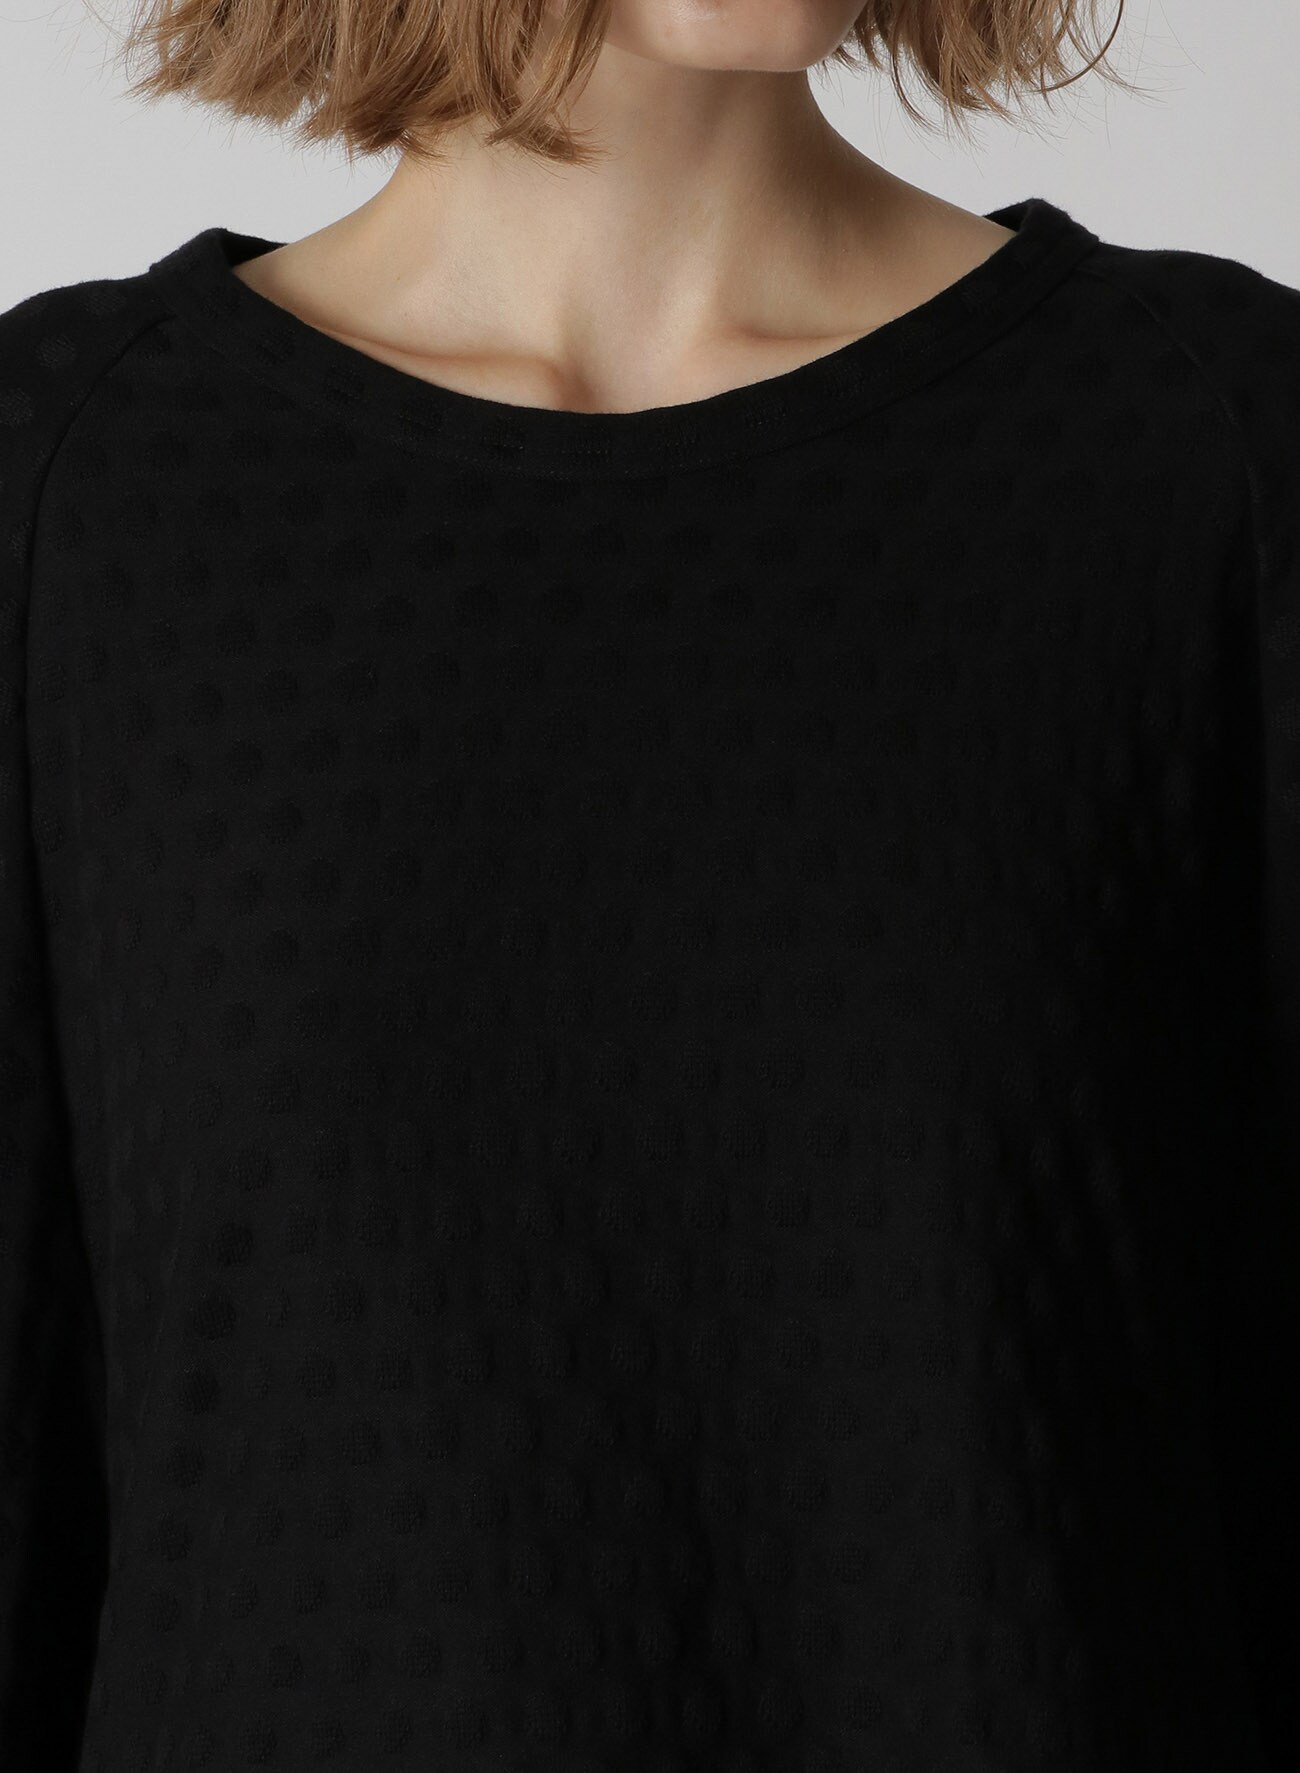 DOT JAQUARD RELAXED FIT T-SHIRT